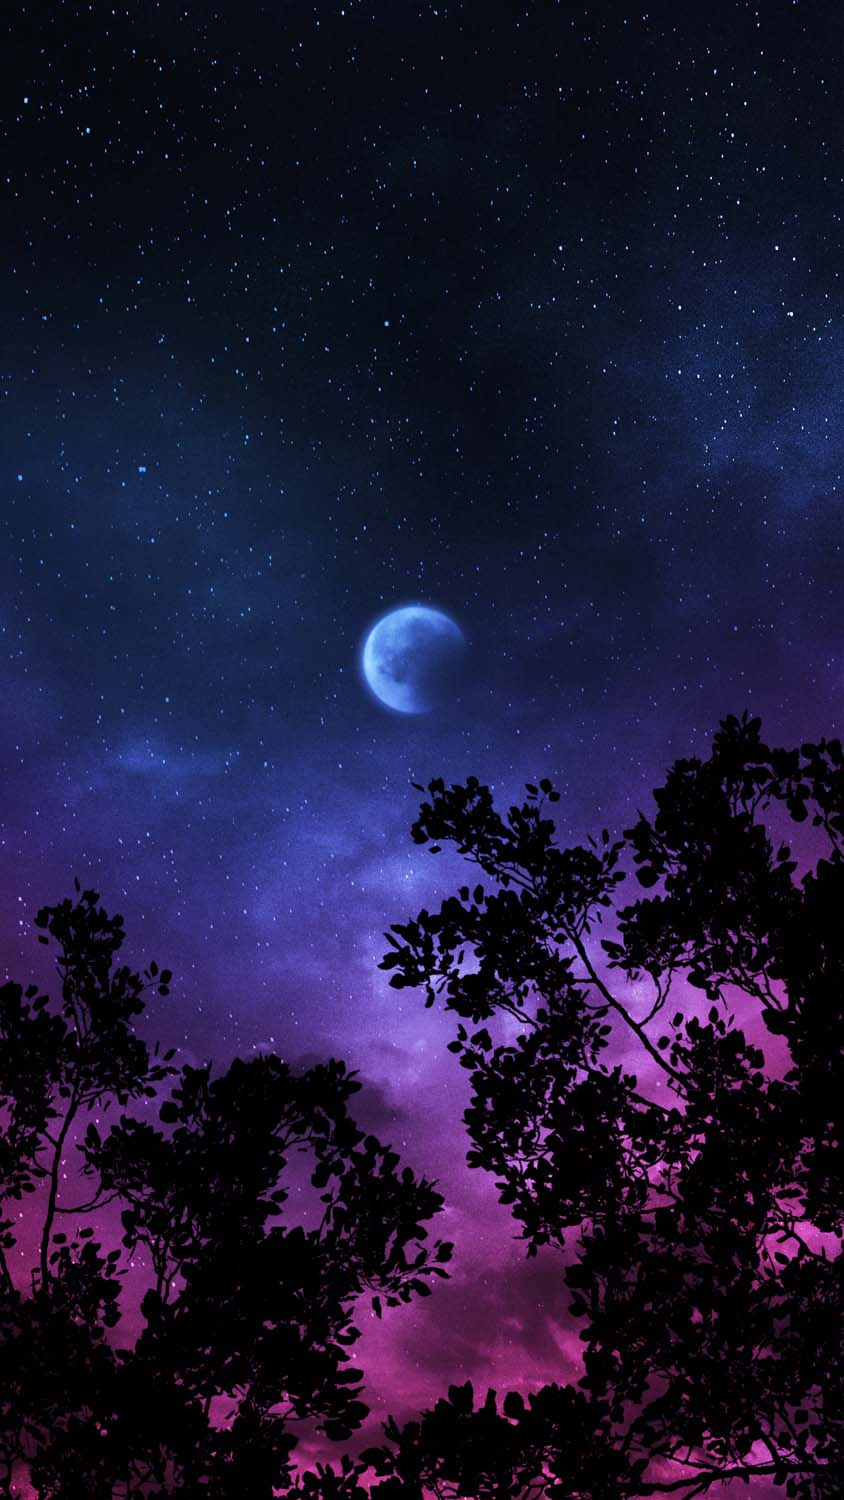 Moon Silhouette IPhone Wallpaper HD  IPhone Wallpapers